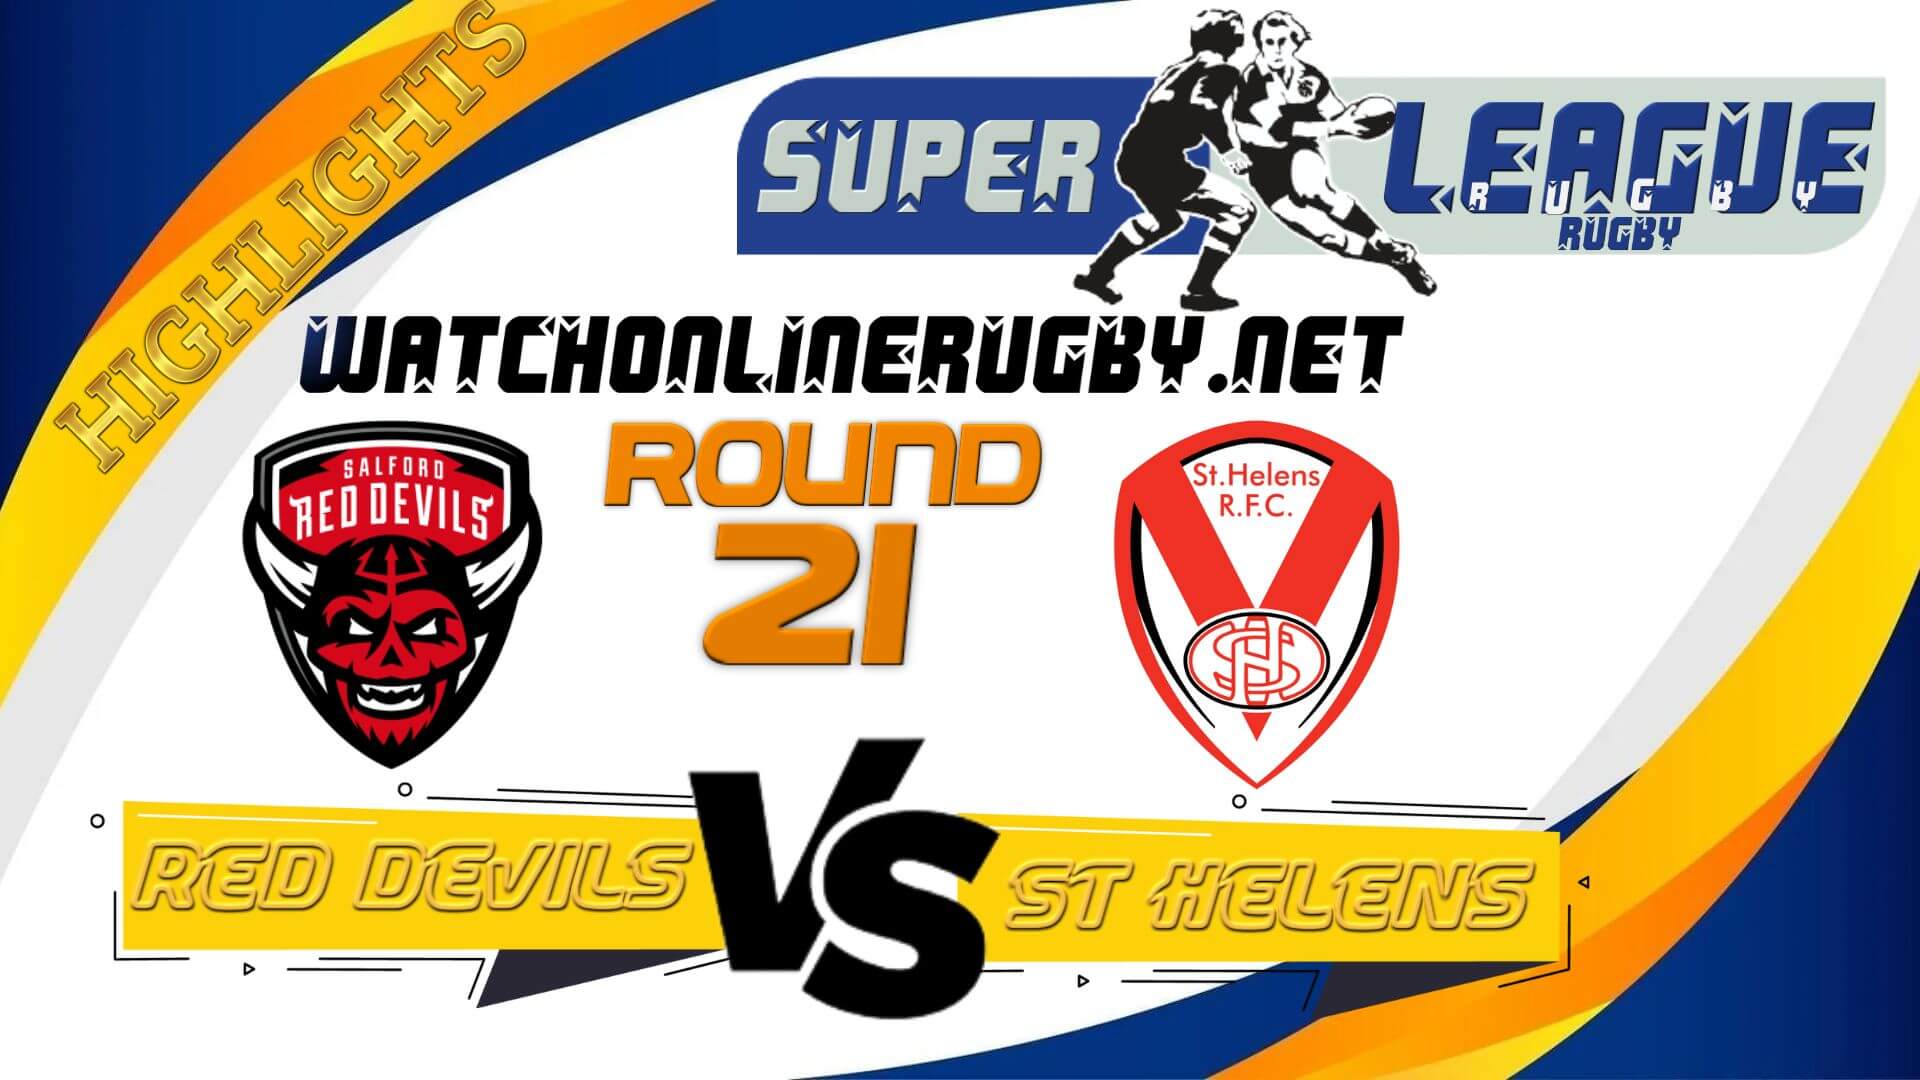 Salford Red Devils Vs St Helens Super League Rugby 2022 RD 21